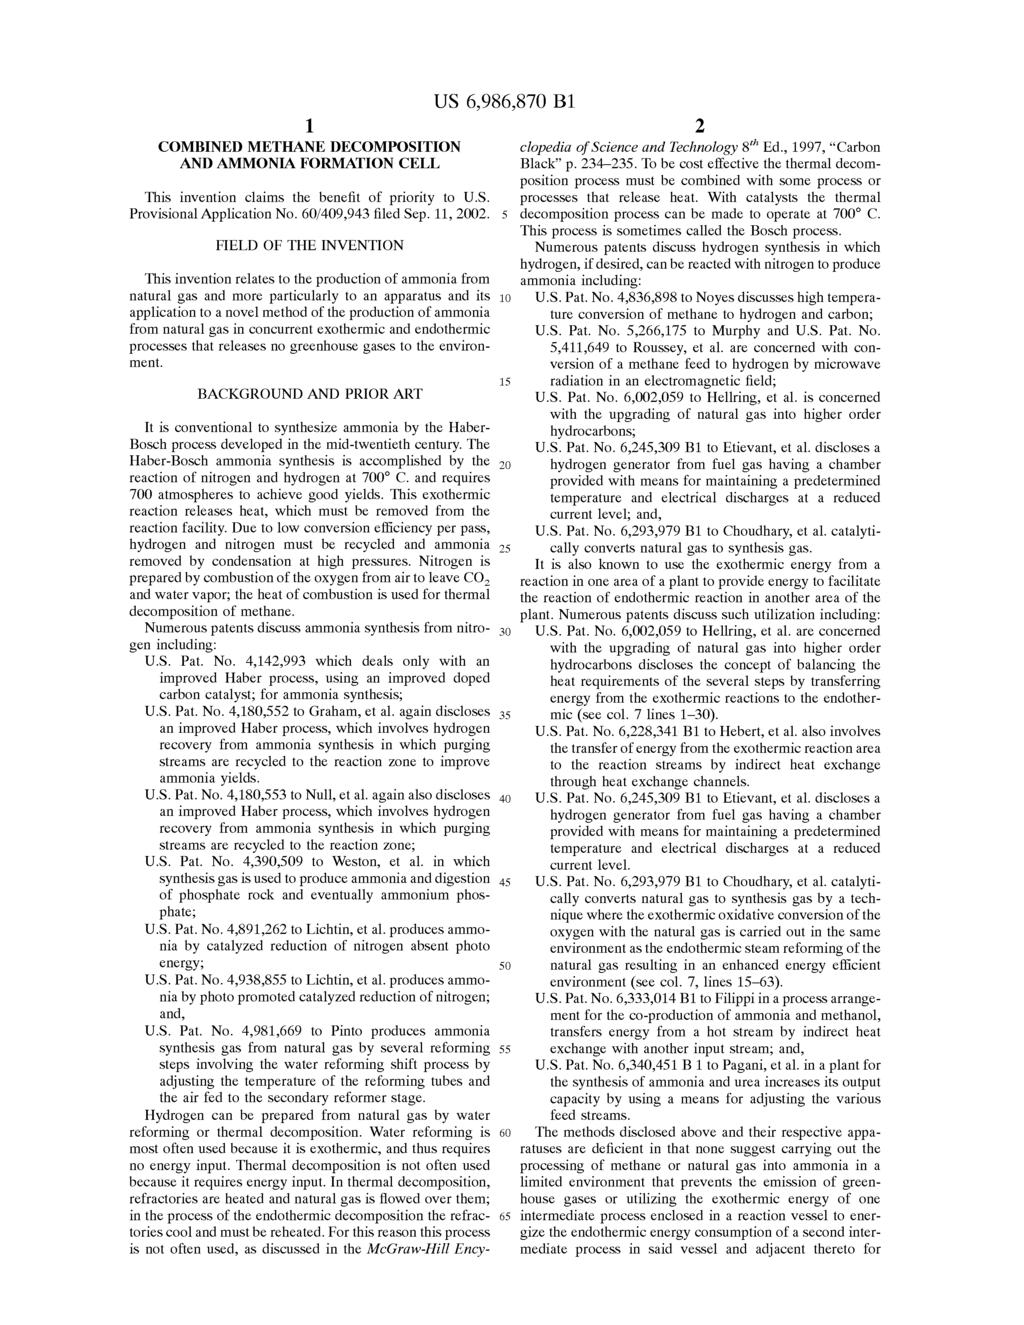 1 COMBINED METHANE DECOMPOSITION AND AMMONIA FORMATION CELL US 6,986,870 Bl This invention claims the benefit of priority to U.S. Provisional Application No. 60/409,943 filed Sep. 11, 2002.